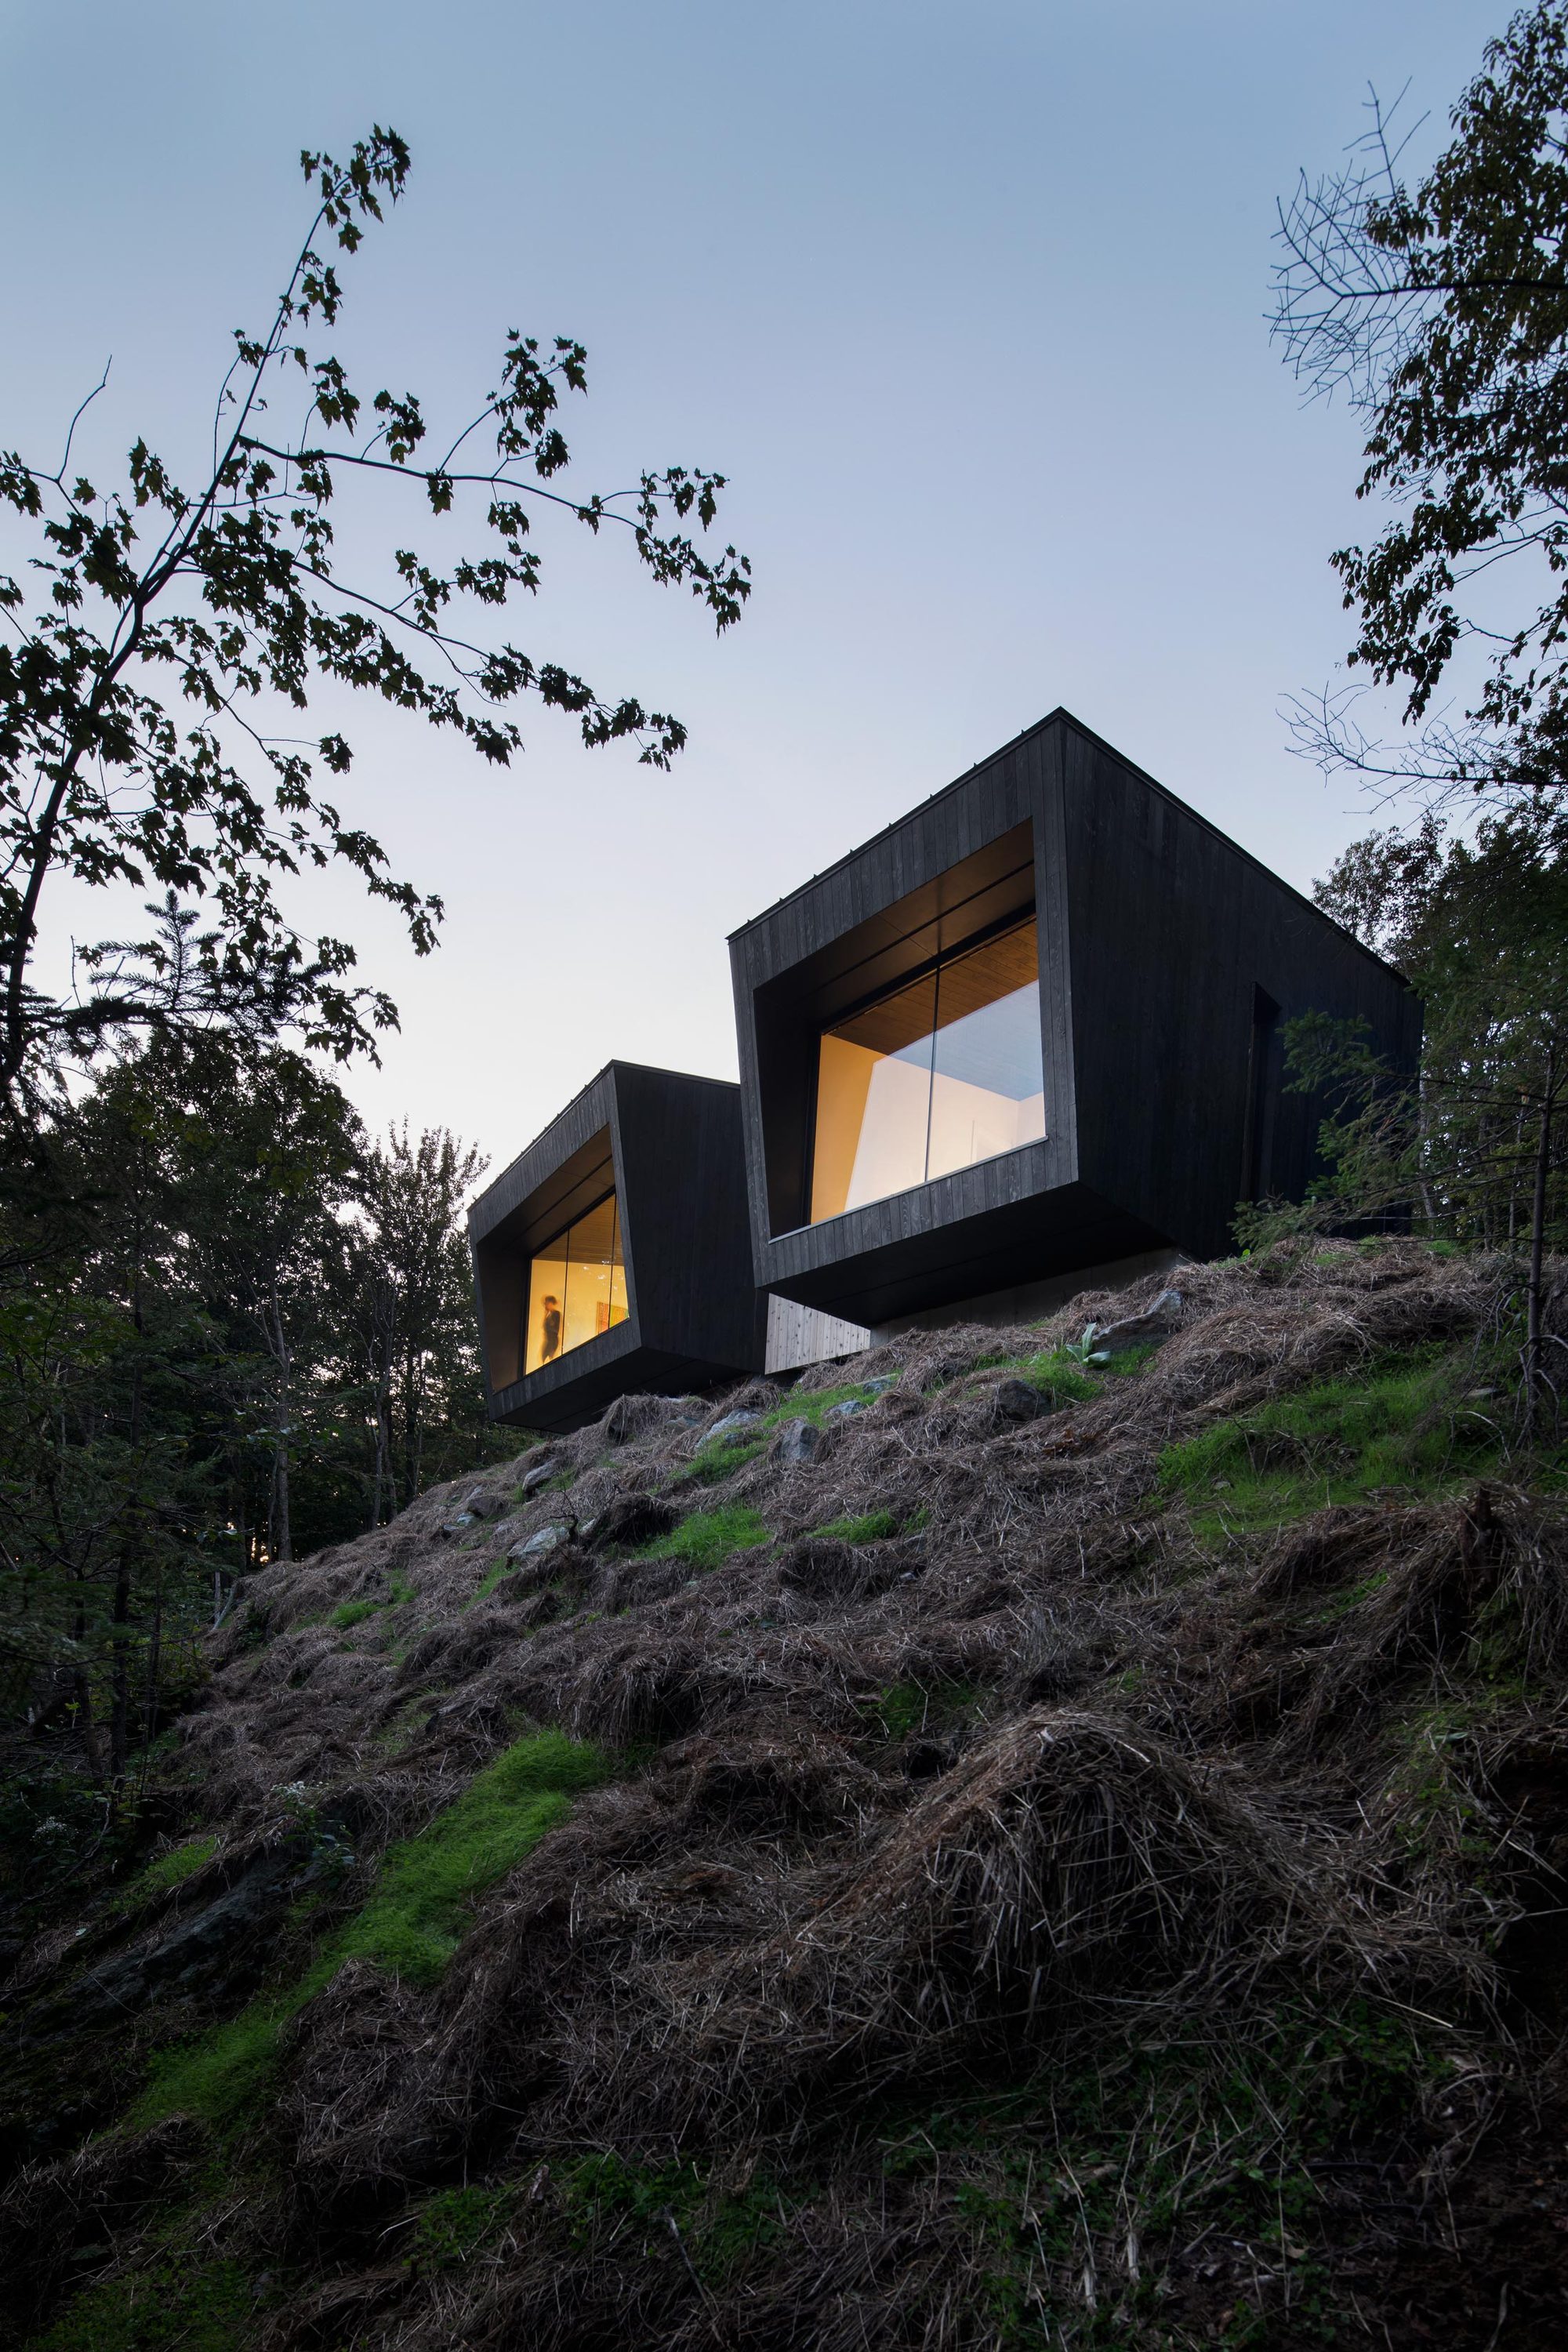 Minimal-and-modern-cabin-sits-on-the-edge-of-a-cliff